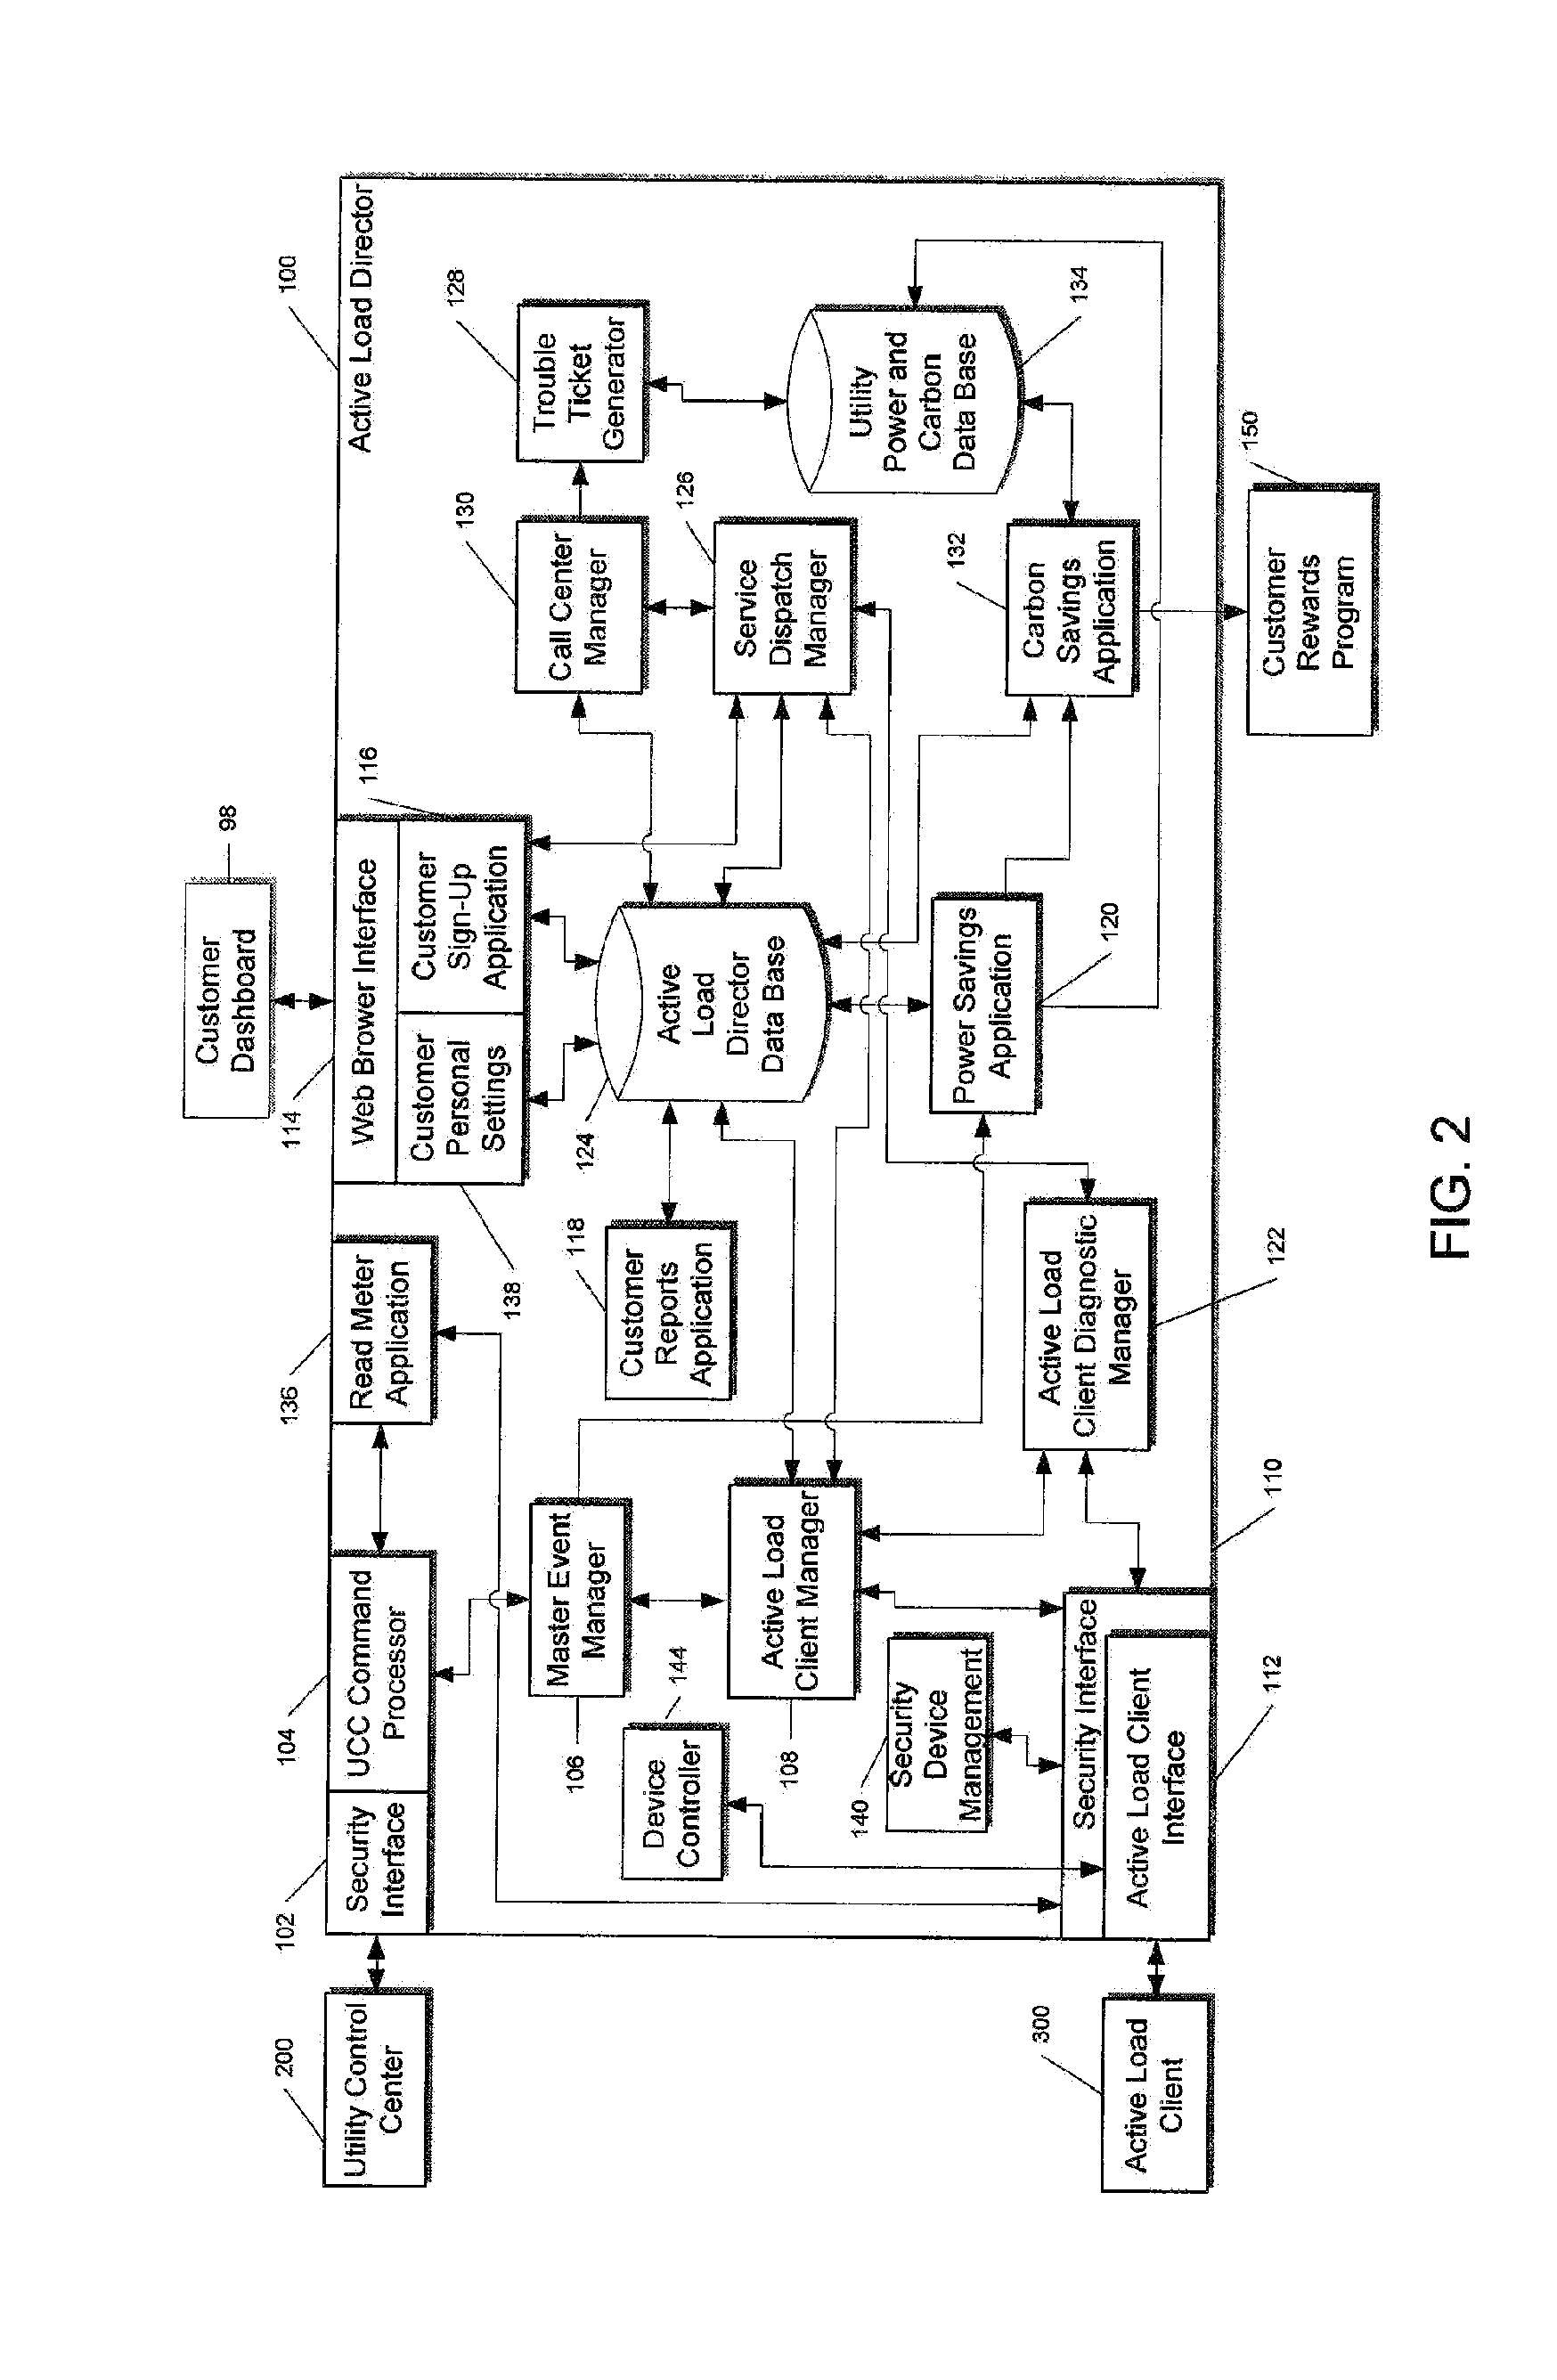 Systems and methods for determining and utilizing customer energy profiles for load control for individual structures, devices, and aggregation of same